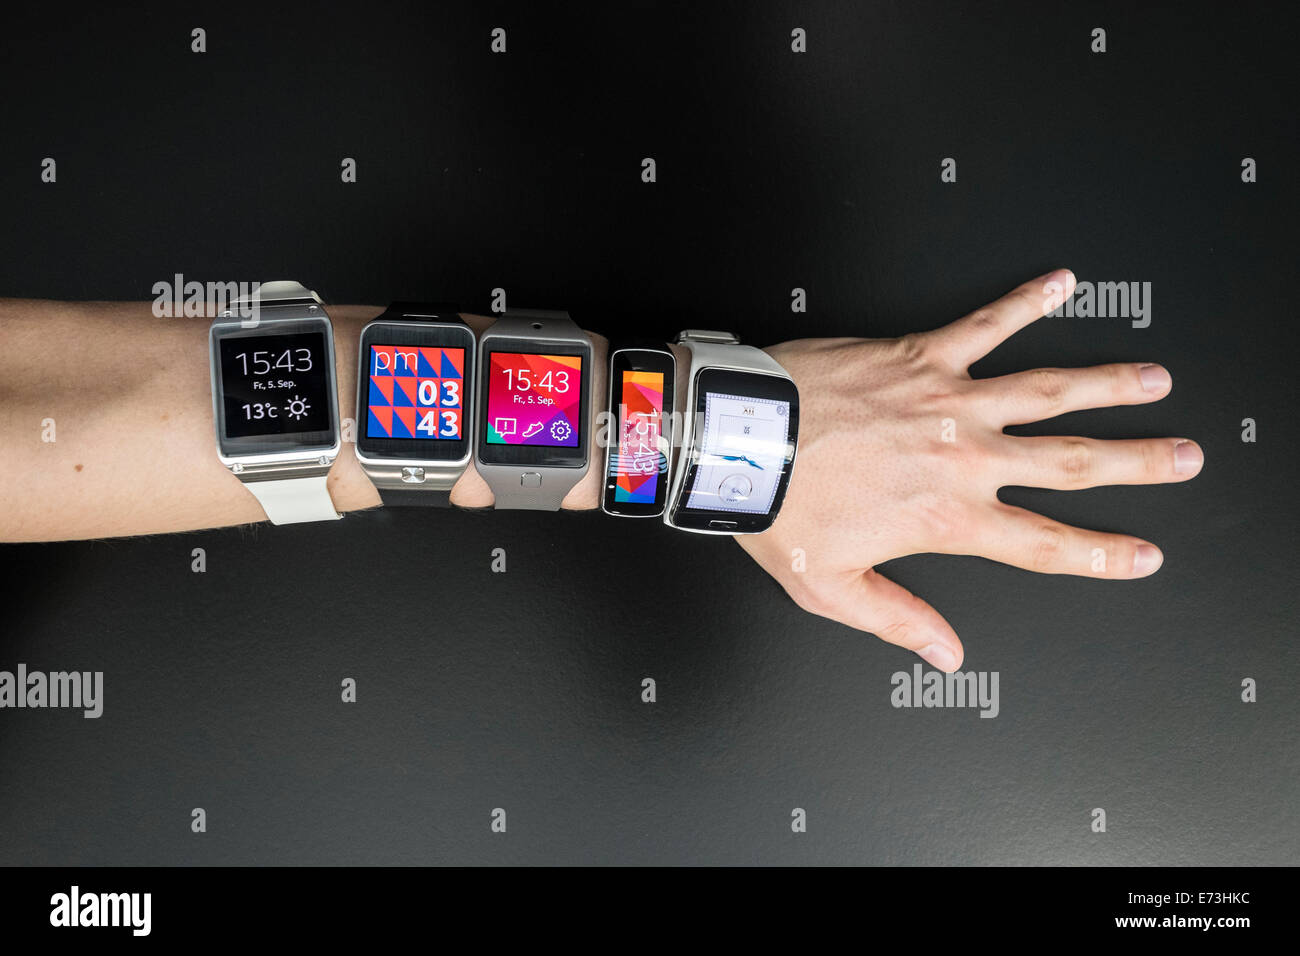 Berlin, Germany. 5th September, 2014. Many Samsung Gear smart watches displayed on an arm at IFA 2014 consumer electronics show in Berlin Credit:  Iain Masterton/Alamy Live News Stock Photo